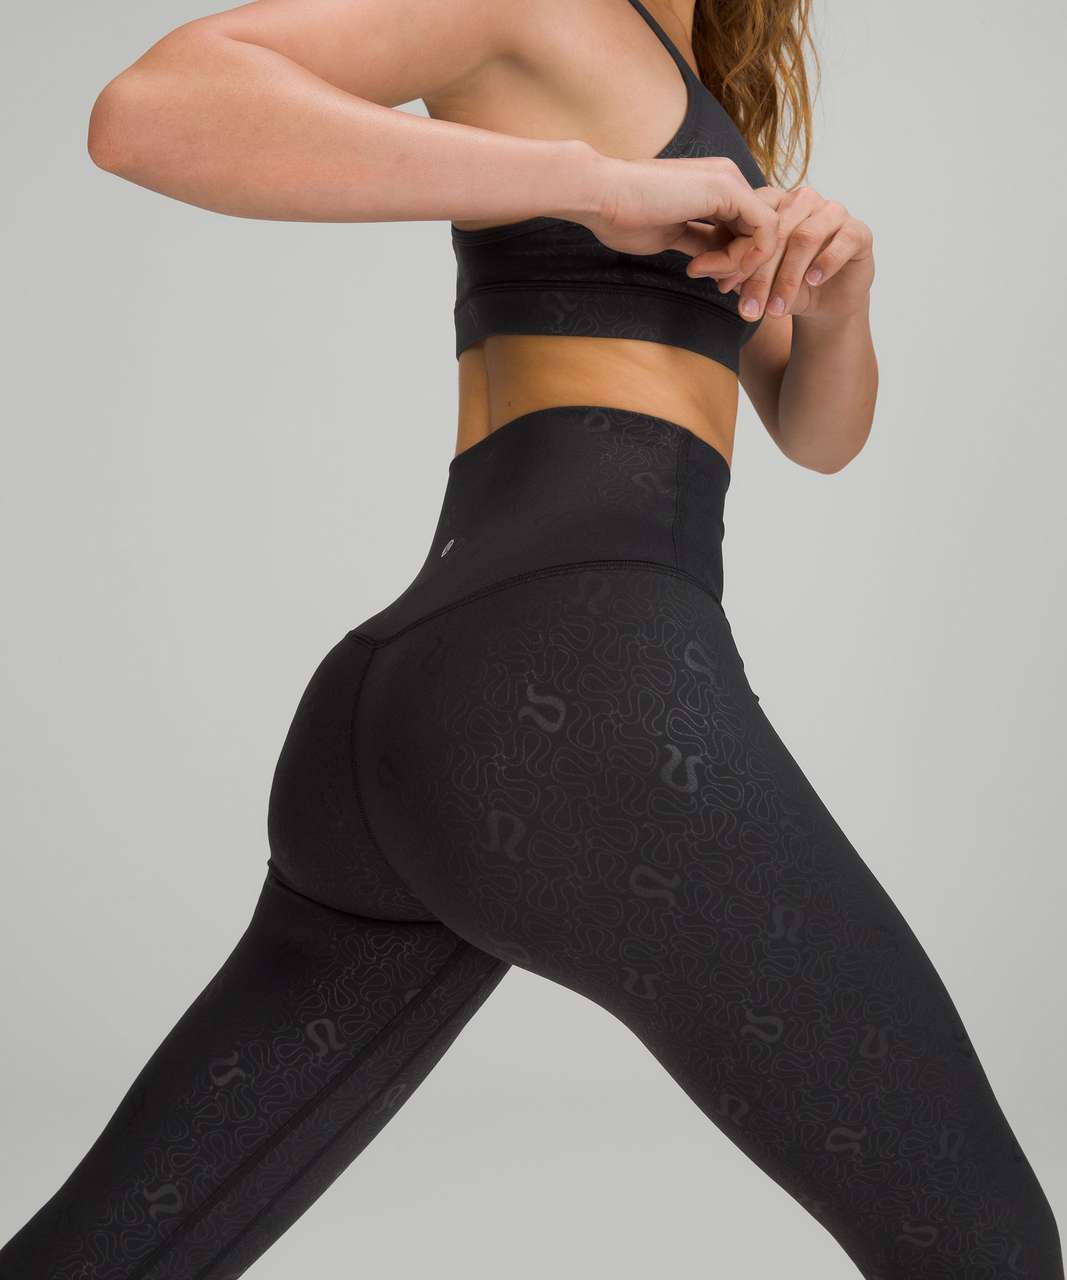 LULULEMON ALIGN PANT HR 25” With Pockets Black Size 8 New With Tags £85.03  - PicClick UK